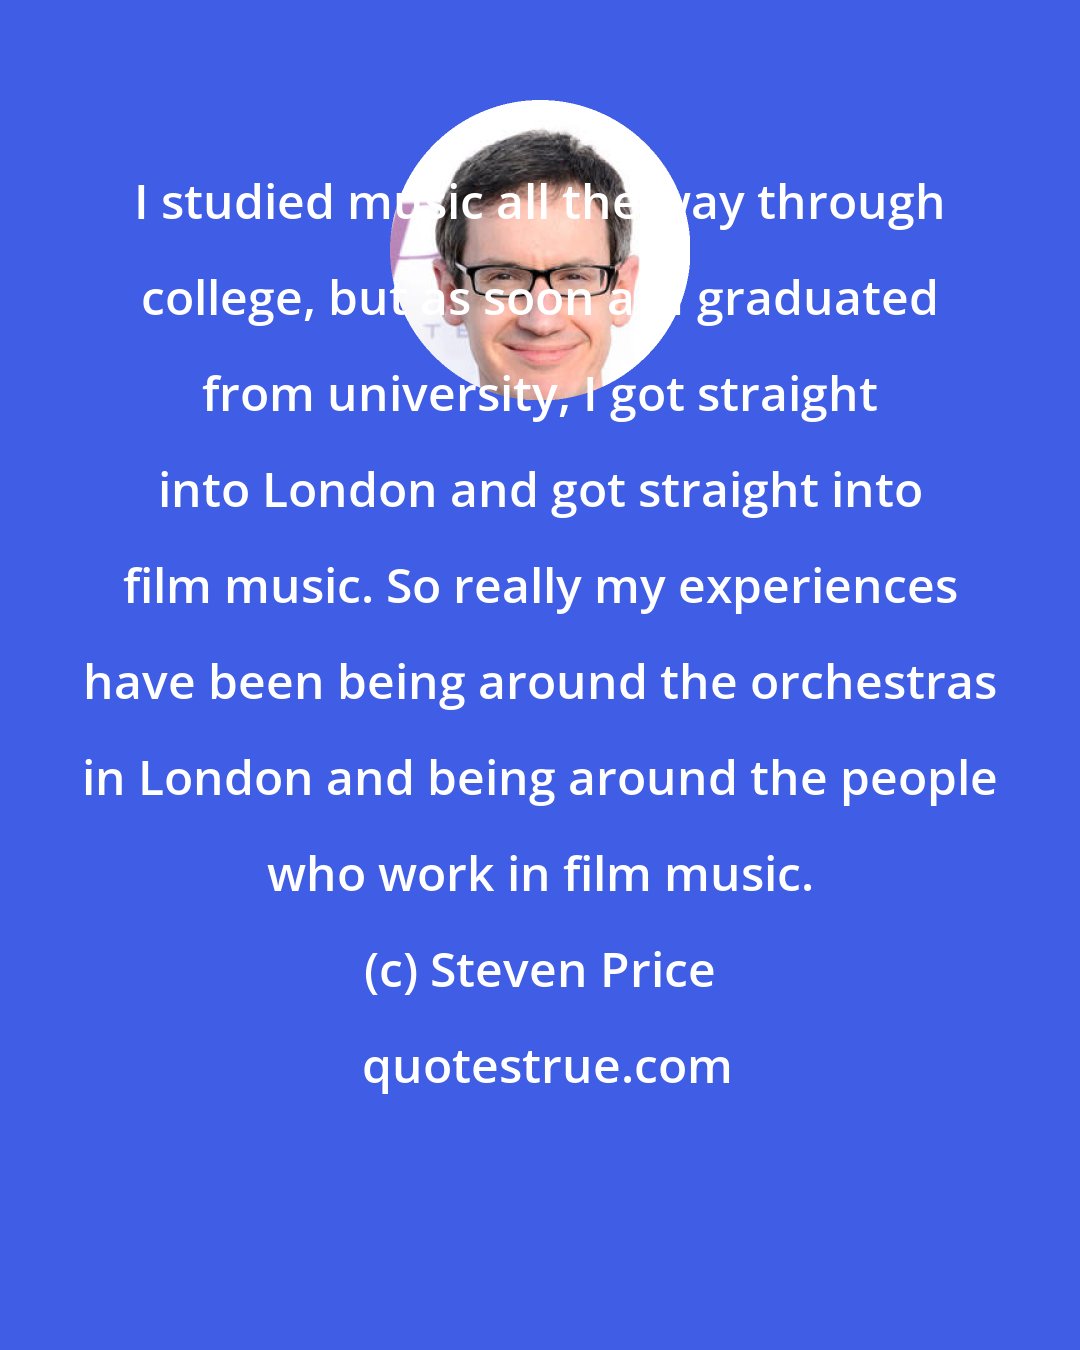 Steven Price: I studied music all the way through college, but as soon as I graduated from university, I got straight into London and got straight into film music. So really my experiences have been being around the orchestras in London and being around the people who work in film music.